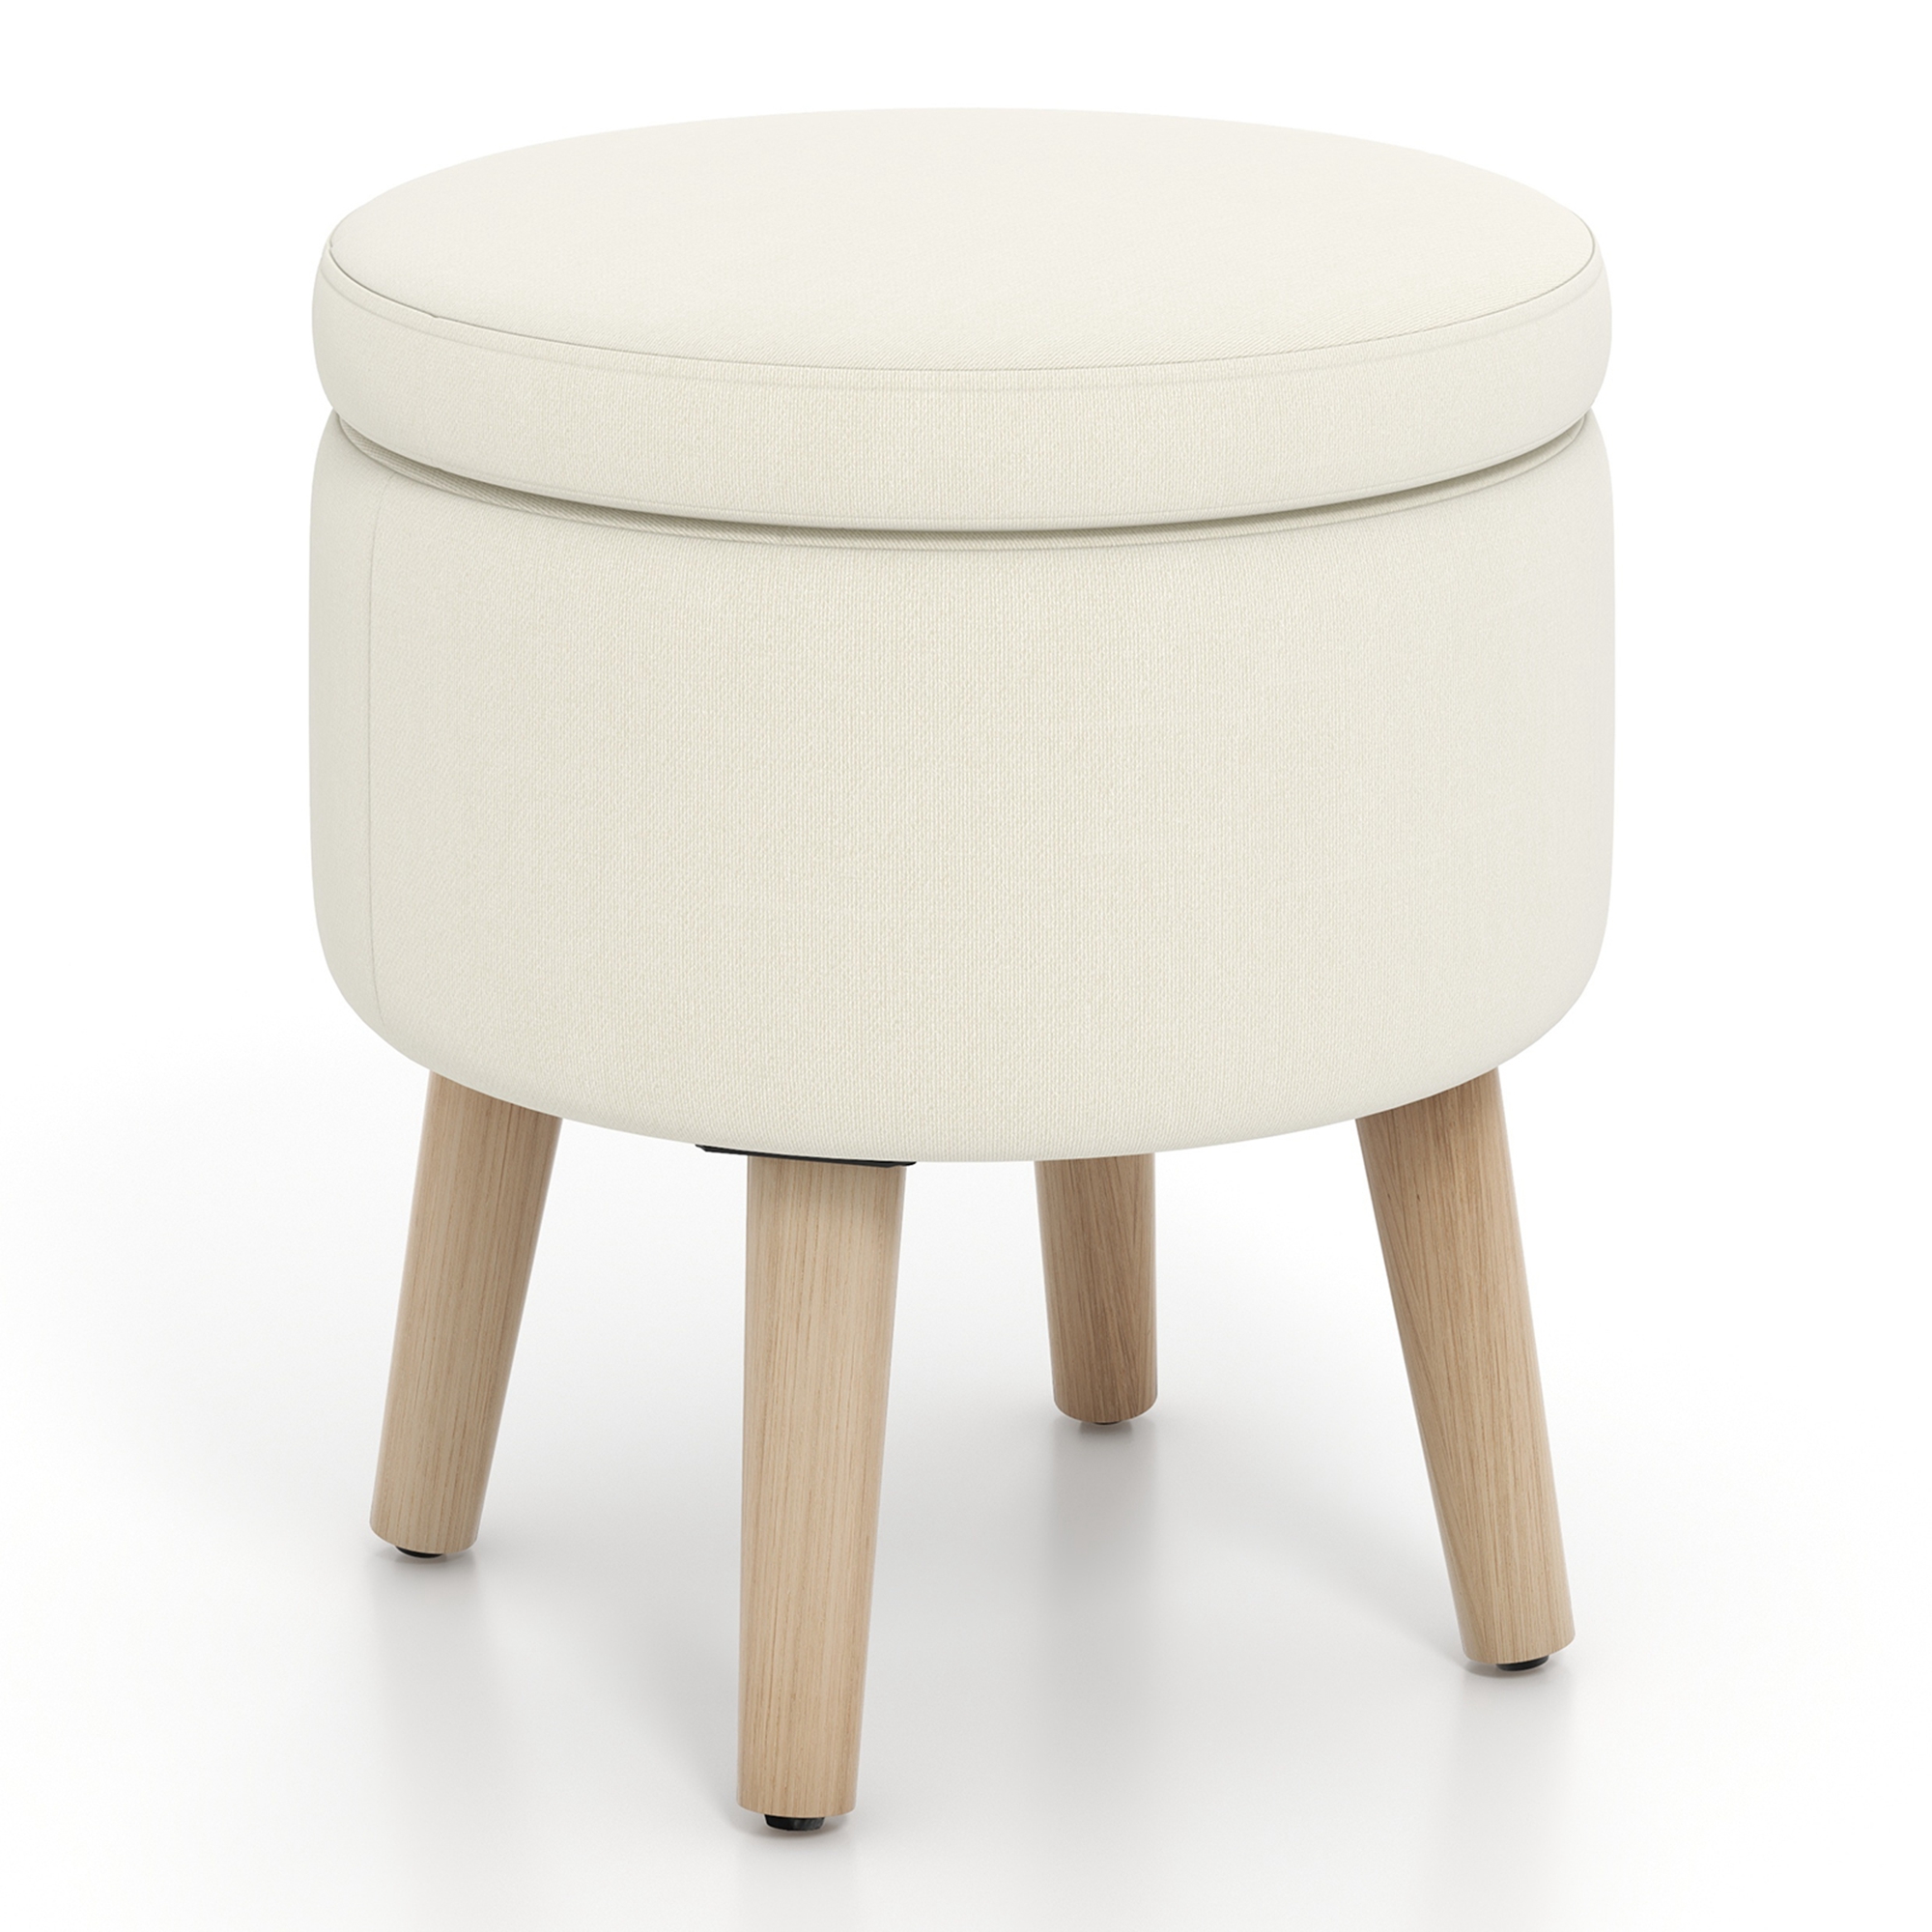 Costway Round Storage Ottoman Accent Storage Footstool with Tray for Living Room Bedroom Beige - image 1 of 10